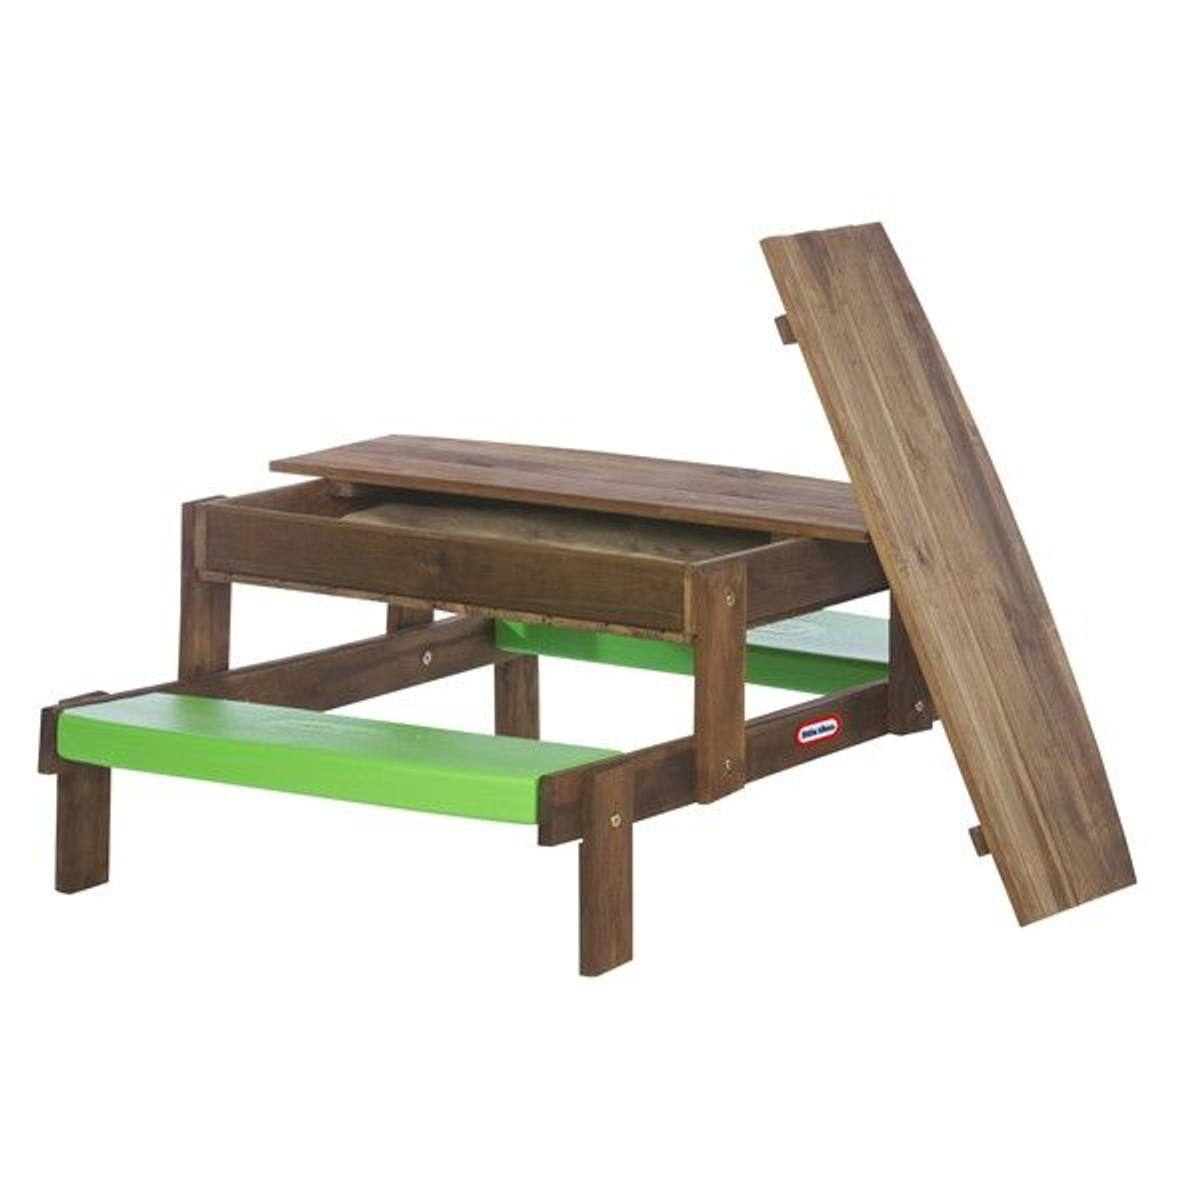 Little Tikes 2In1 Wood Sand/Picnic Table